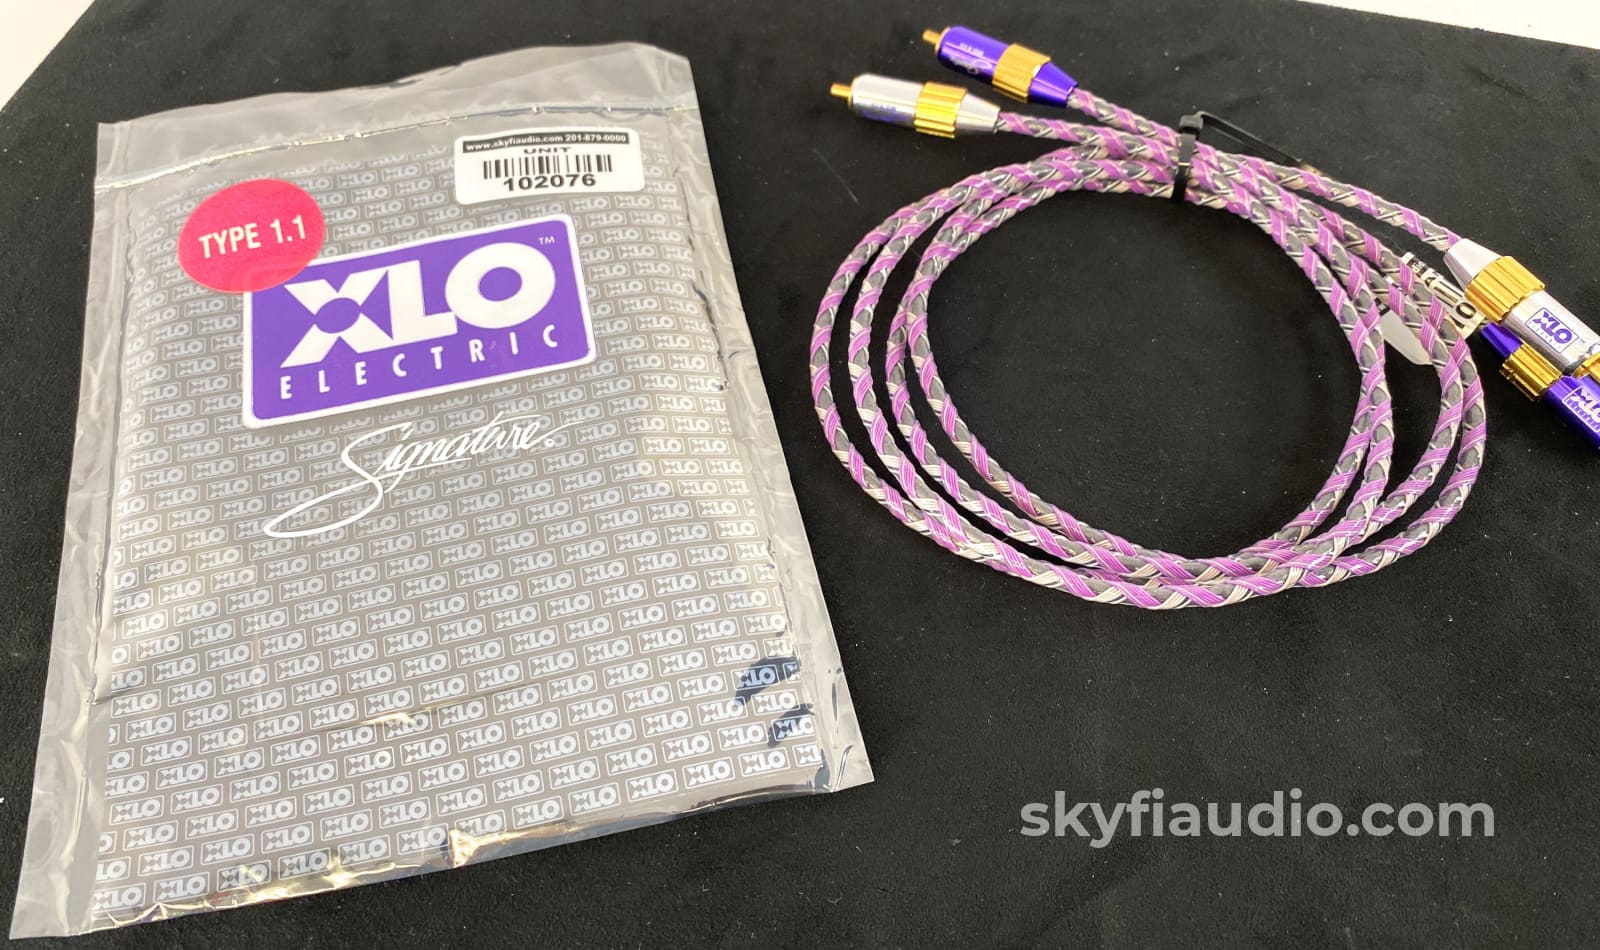 Xlo Signature Series Type 1.1 Rca Interconnect - Like New In Original Packaging 1M Cables